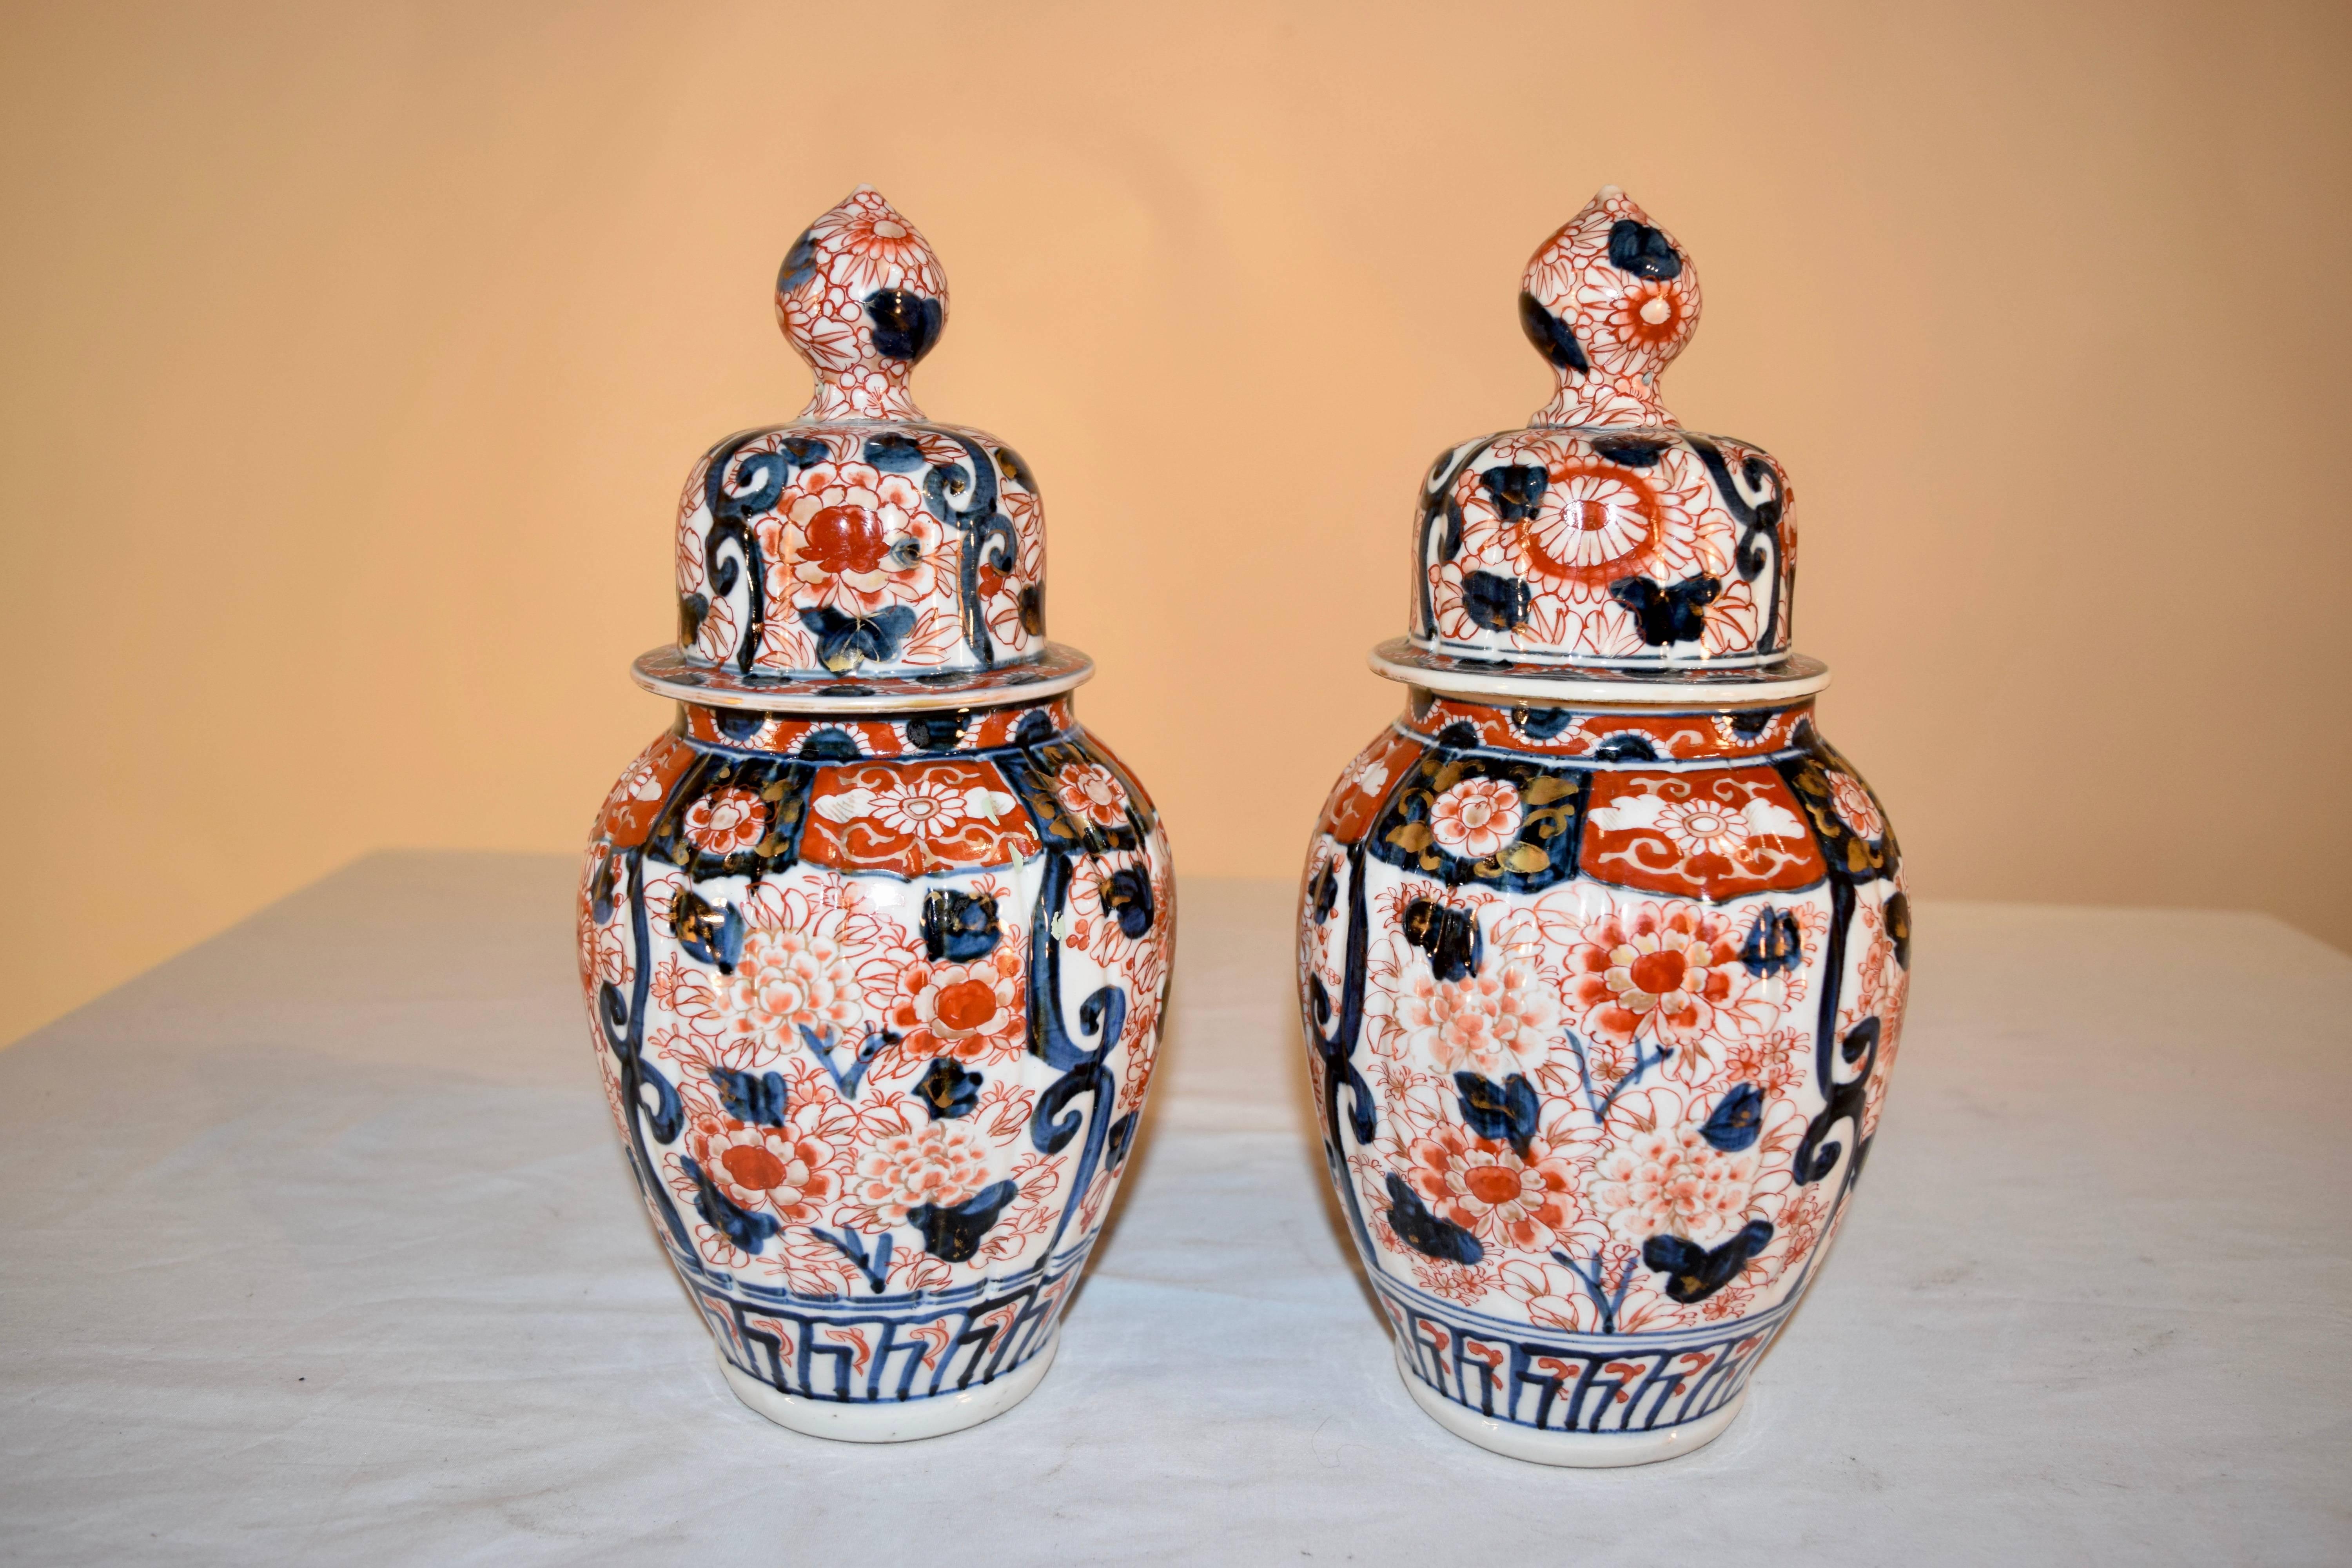 19th century pair of Imari lidded jars with lovely hand-painted designs in floral patterns of rust, cobalt, and gold.